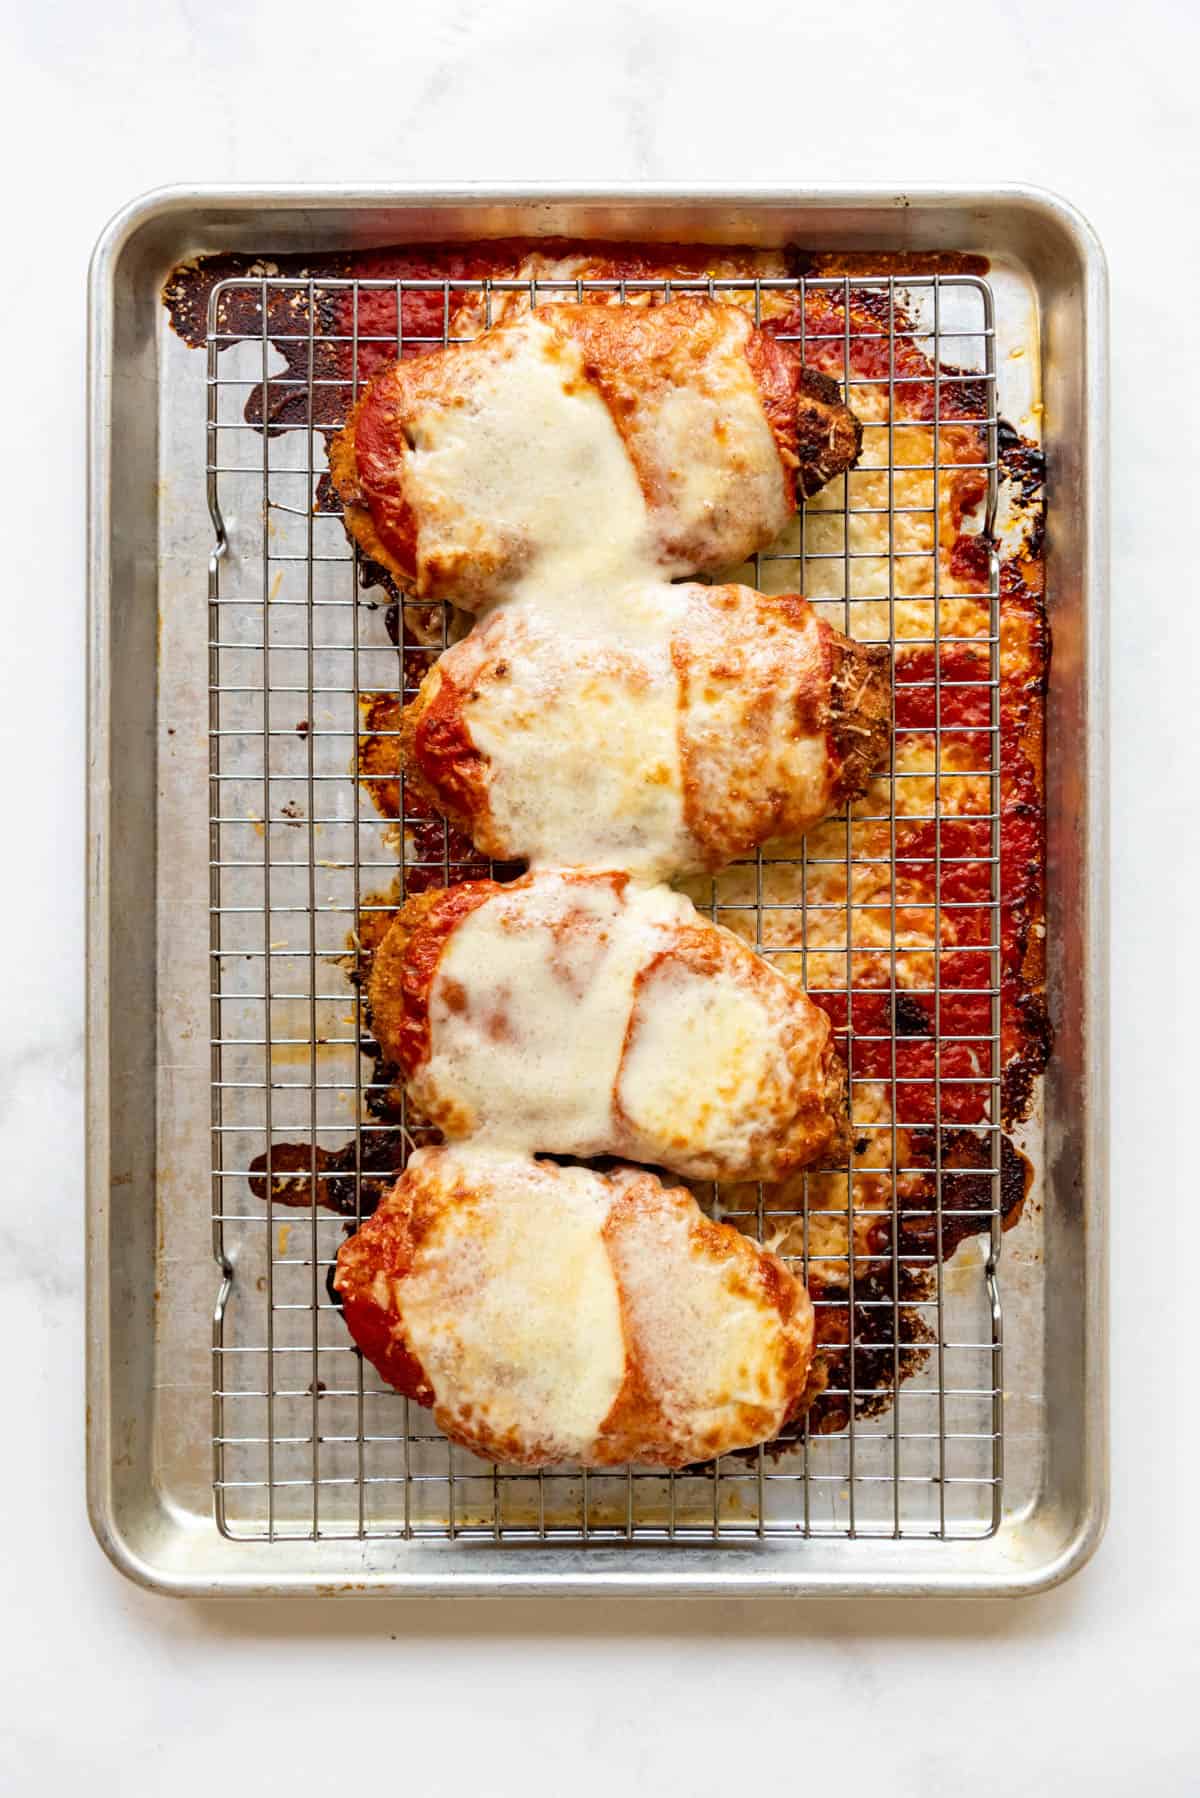 Baked chicken parmesan on a wire rack set over a baking sheet.